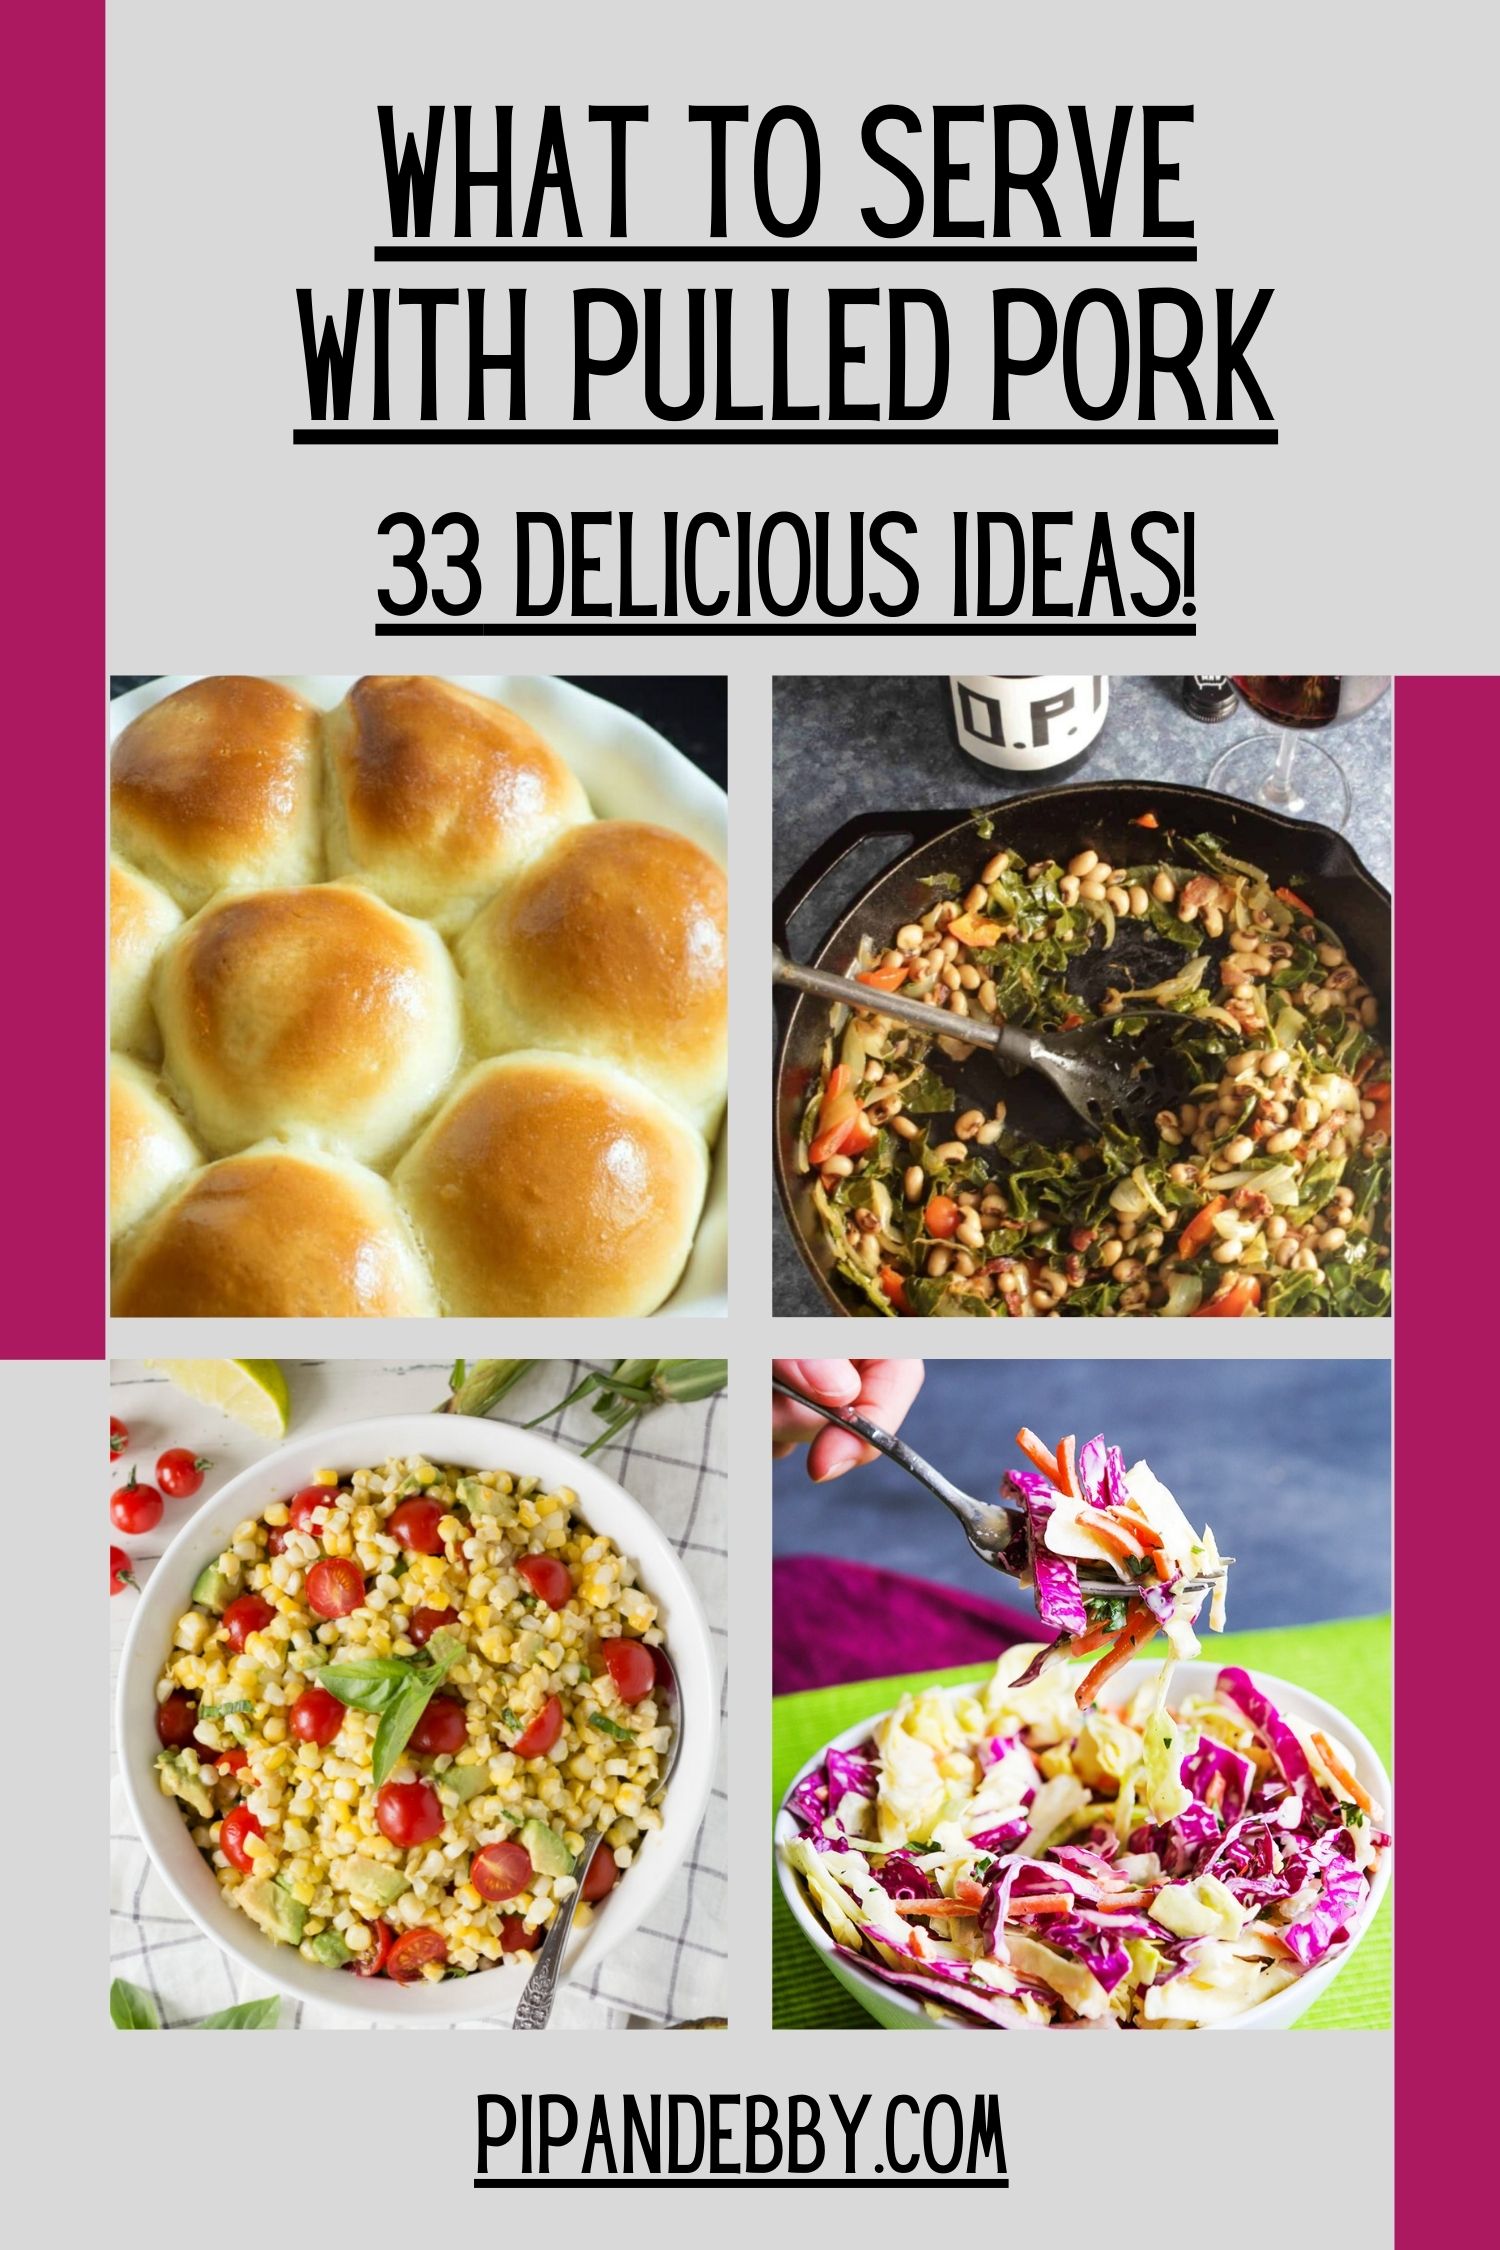 Four food photos in a grid with text reading, "What to serve with pulled pork - 33 delicious ideas!"